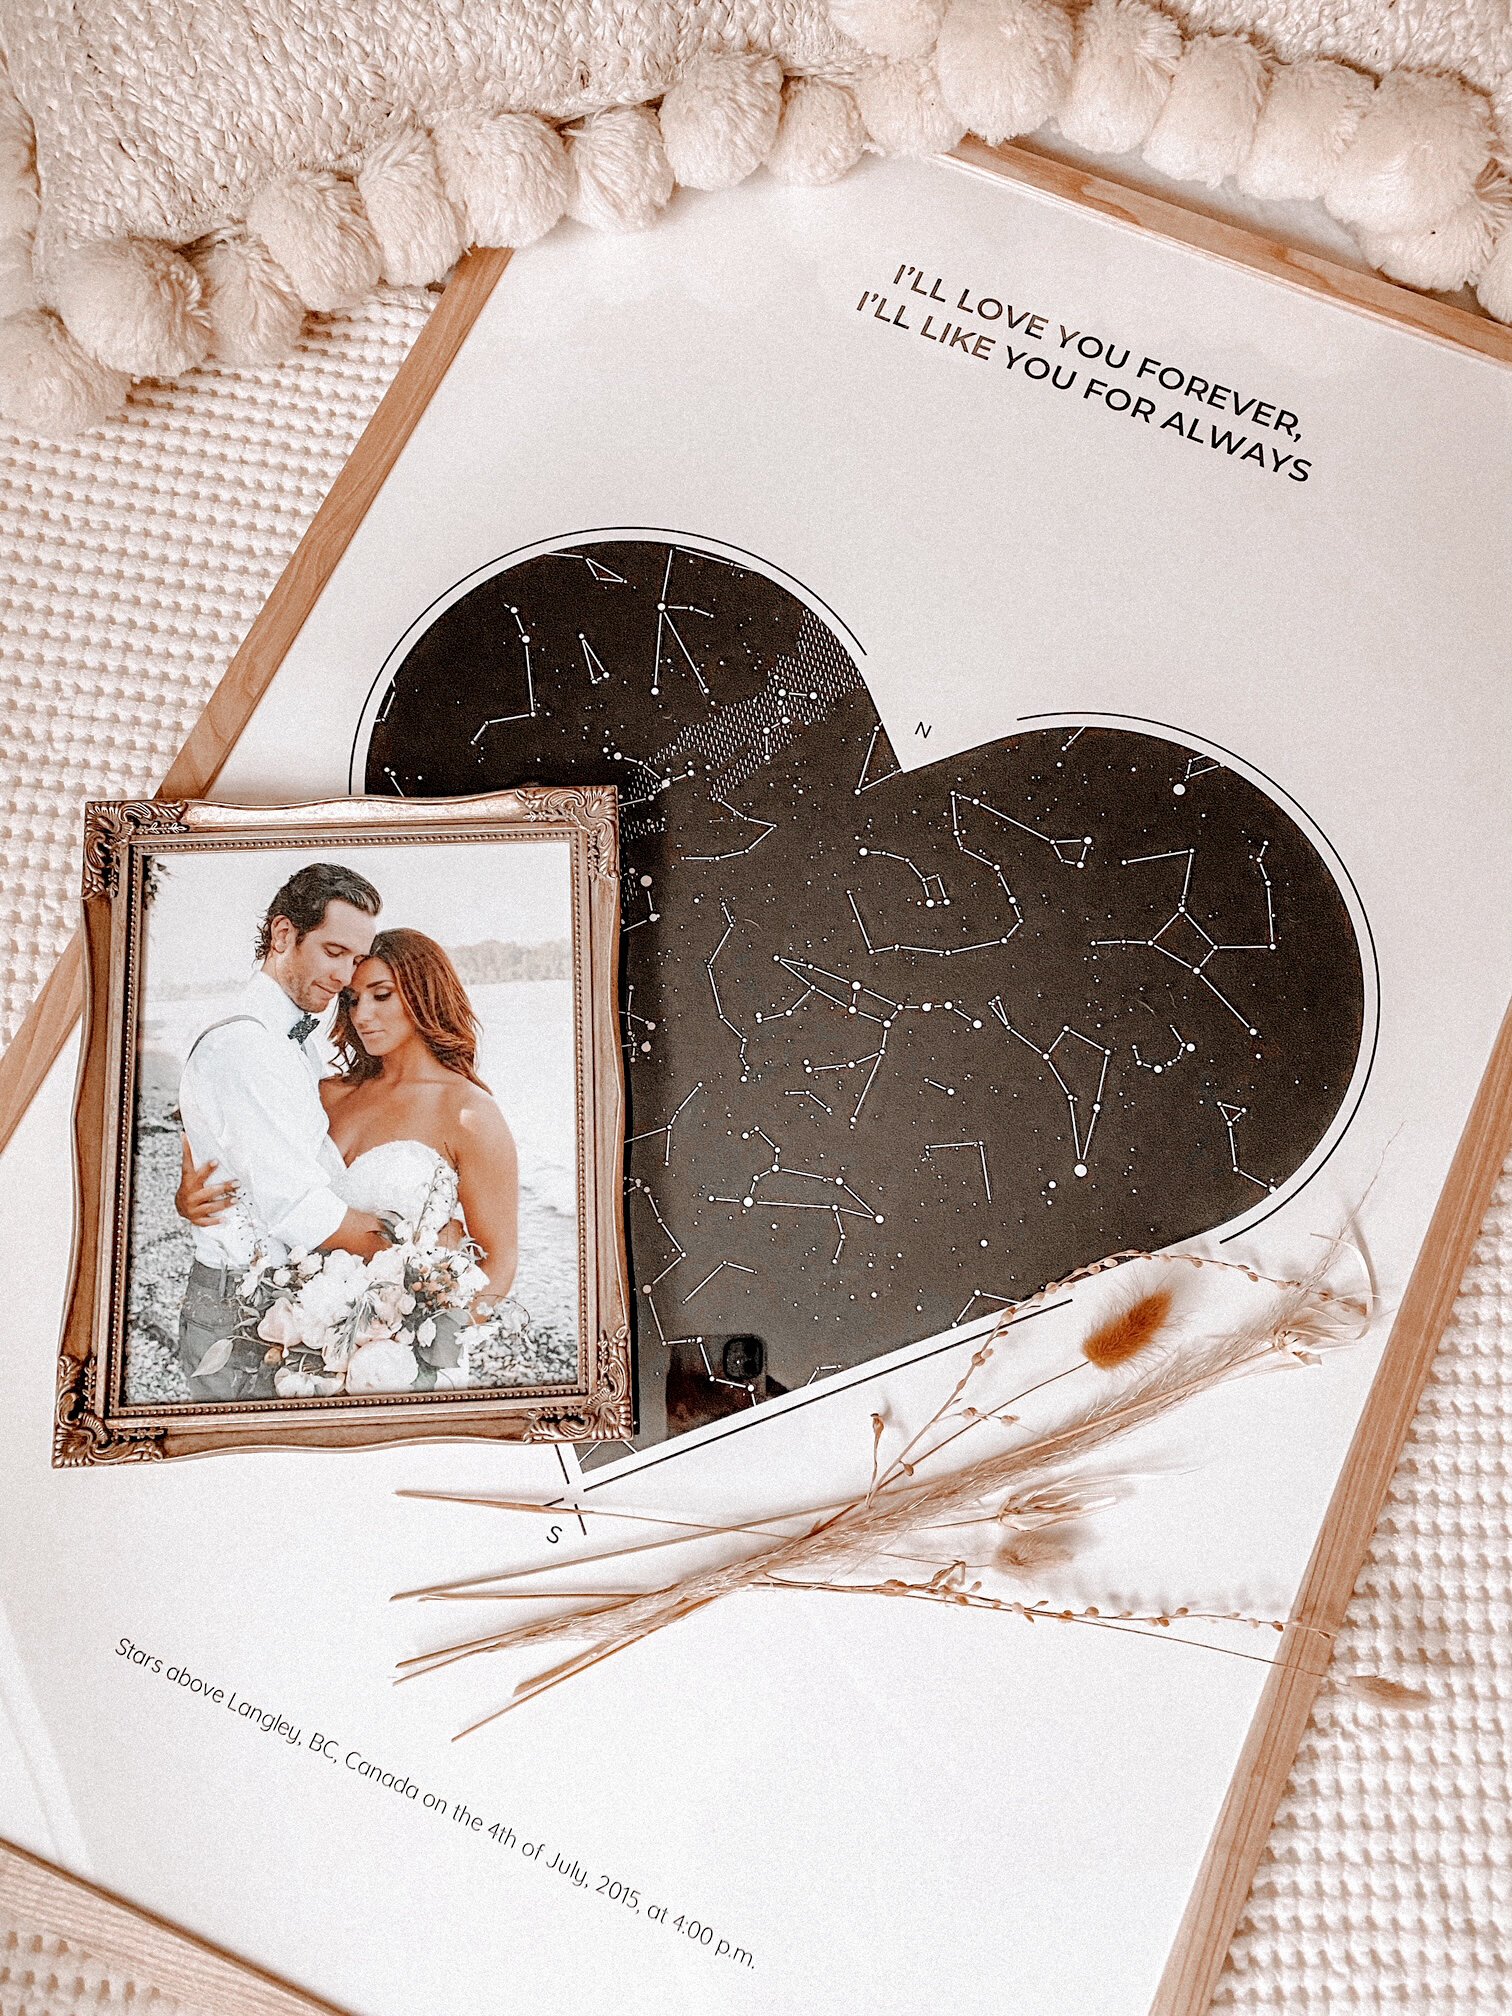 www.santabarbarawedding.com | Under Lucky Stars | Nic Maxam | Heart Shaped ‘I’ll Love You Forever, I’ll Like You For Always’ Star Map with Picture of a Couple 